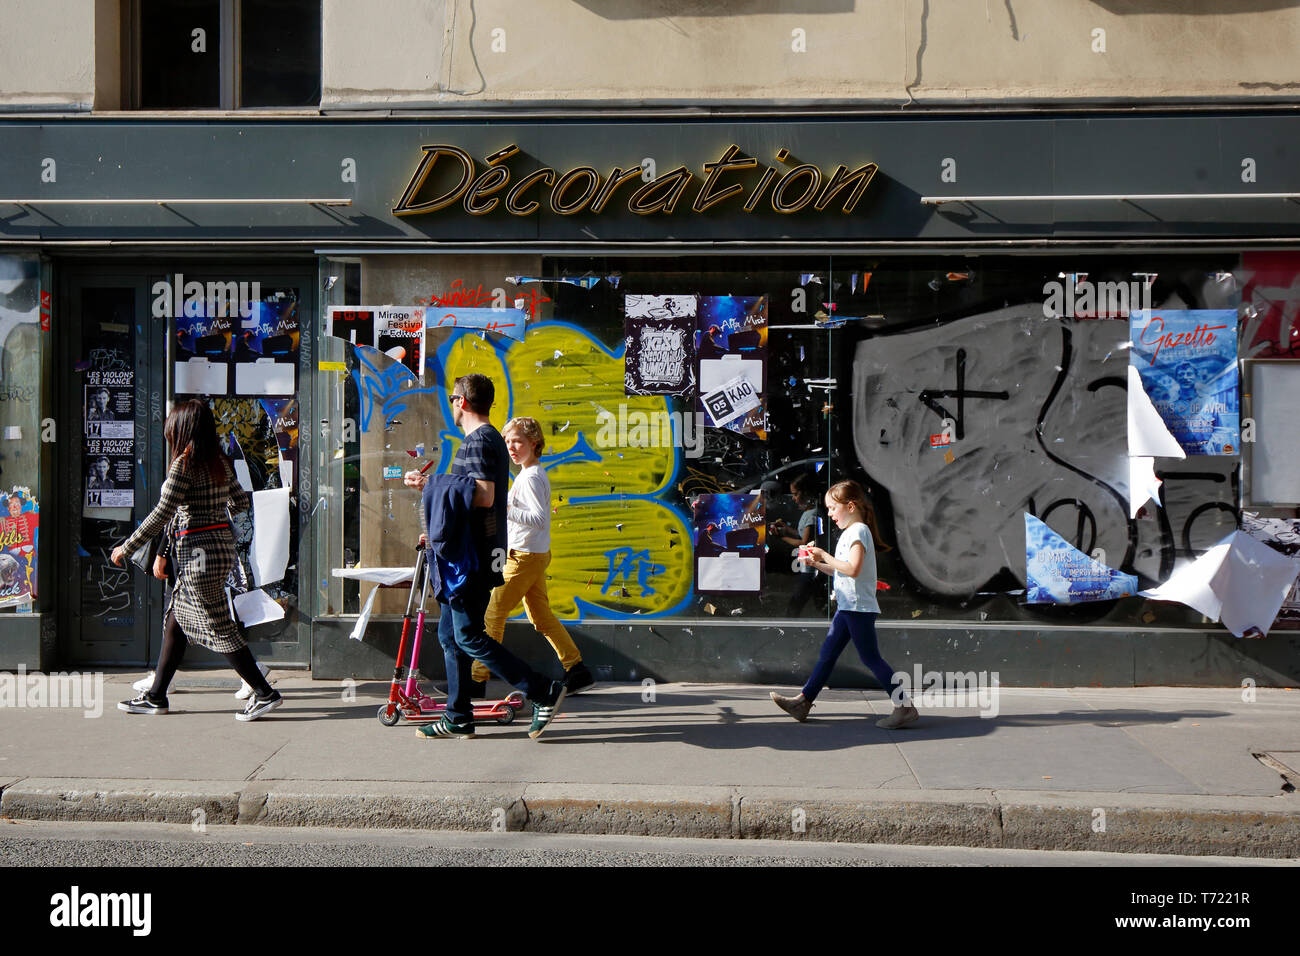 People walk past an empty storefront named Decoration in Lyon, France Stock Photo